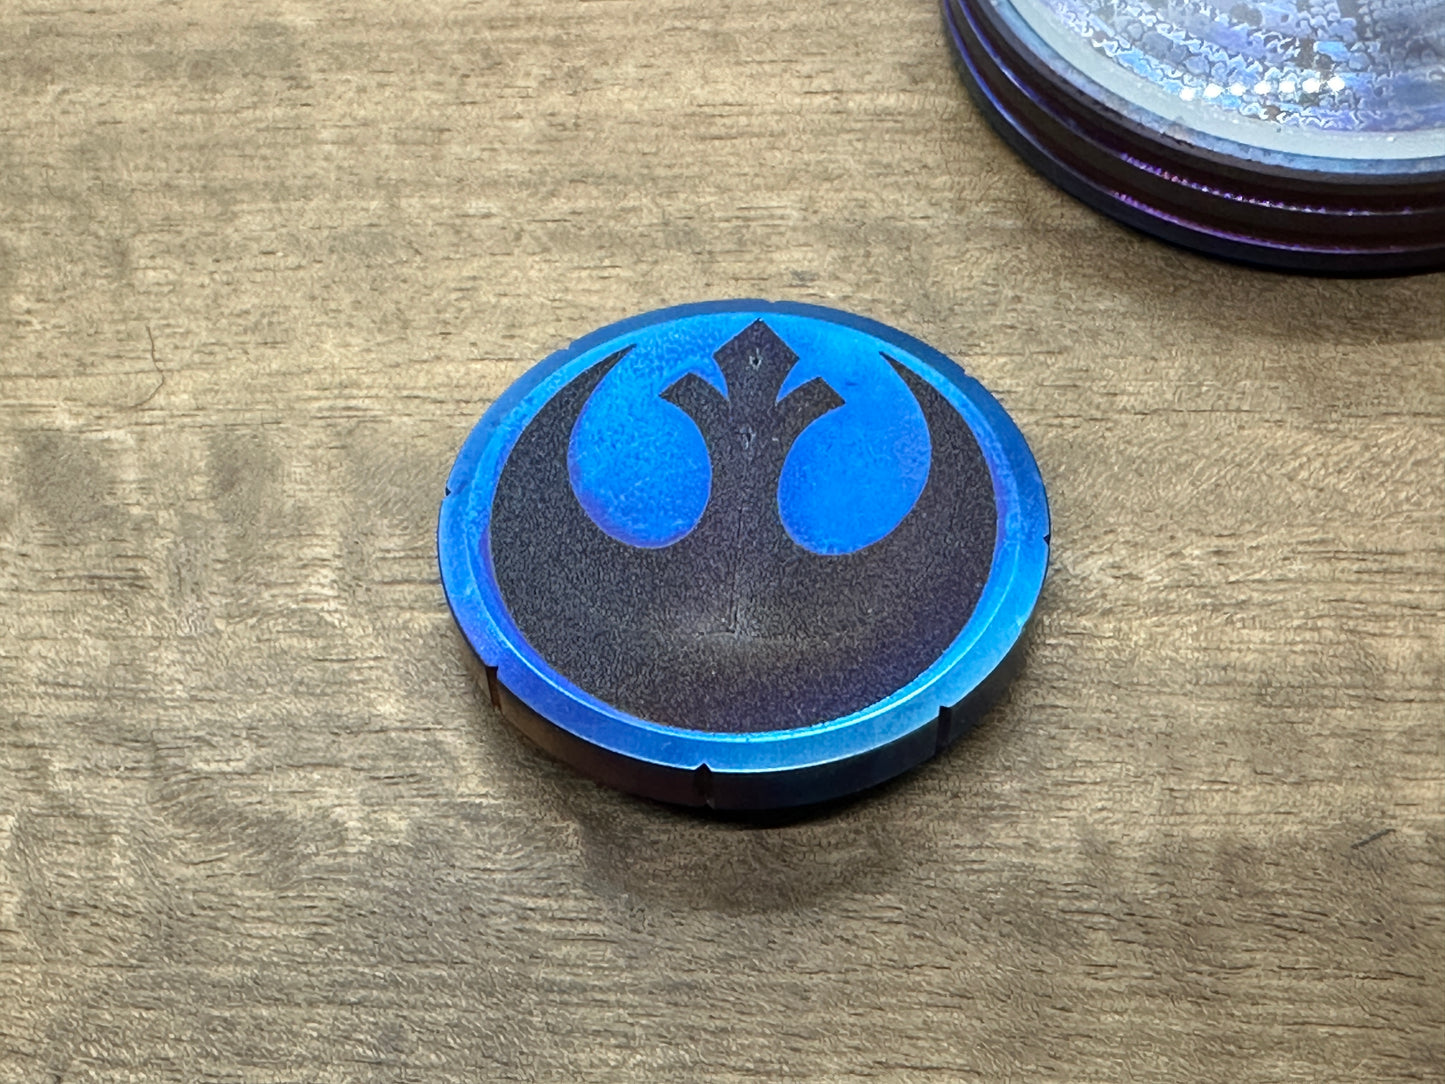 REBEL ALLIANCE Star Wars Deep engraved Flamed Titanium Spinning Worry Coin